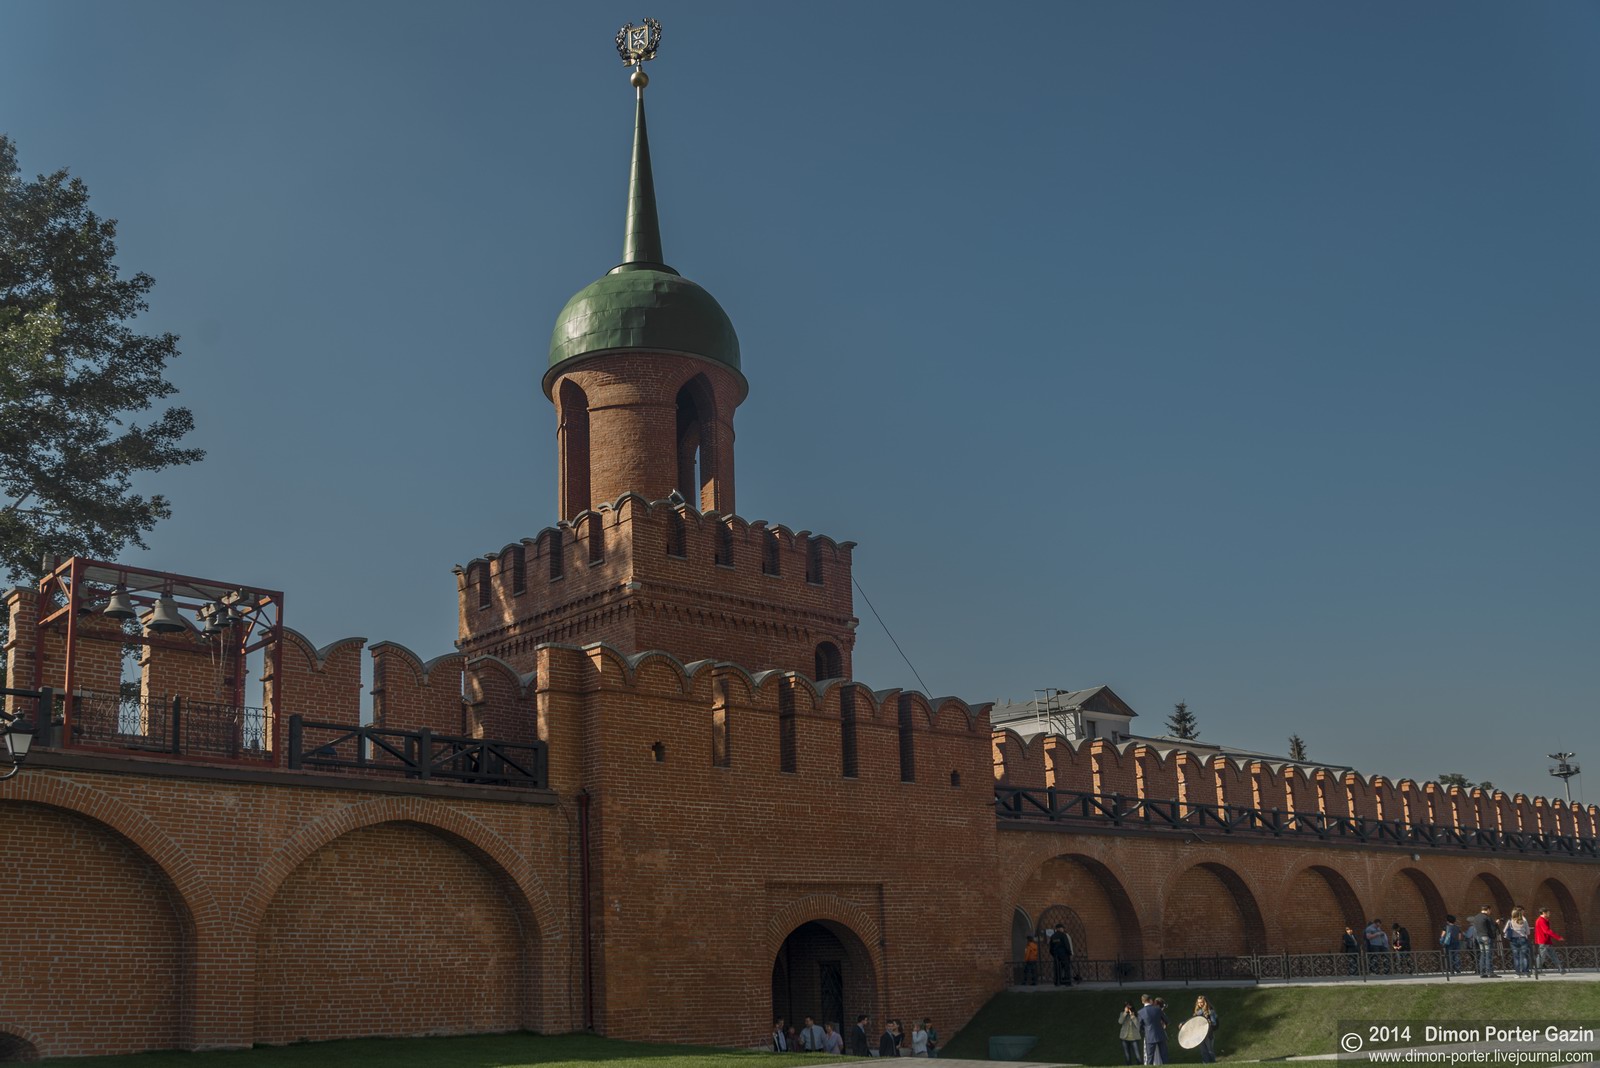 Tula Kremlin – one of the oldest fortresses in Russia · Russia Travel Blog